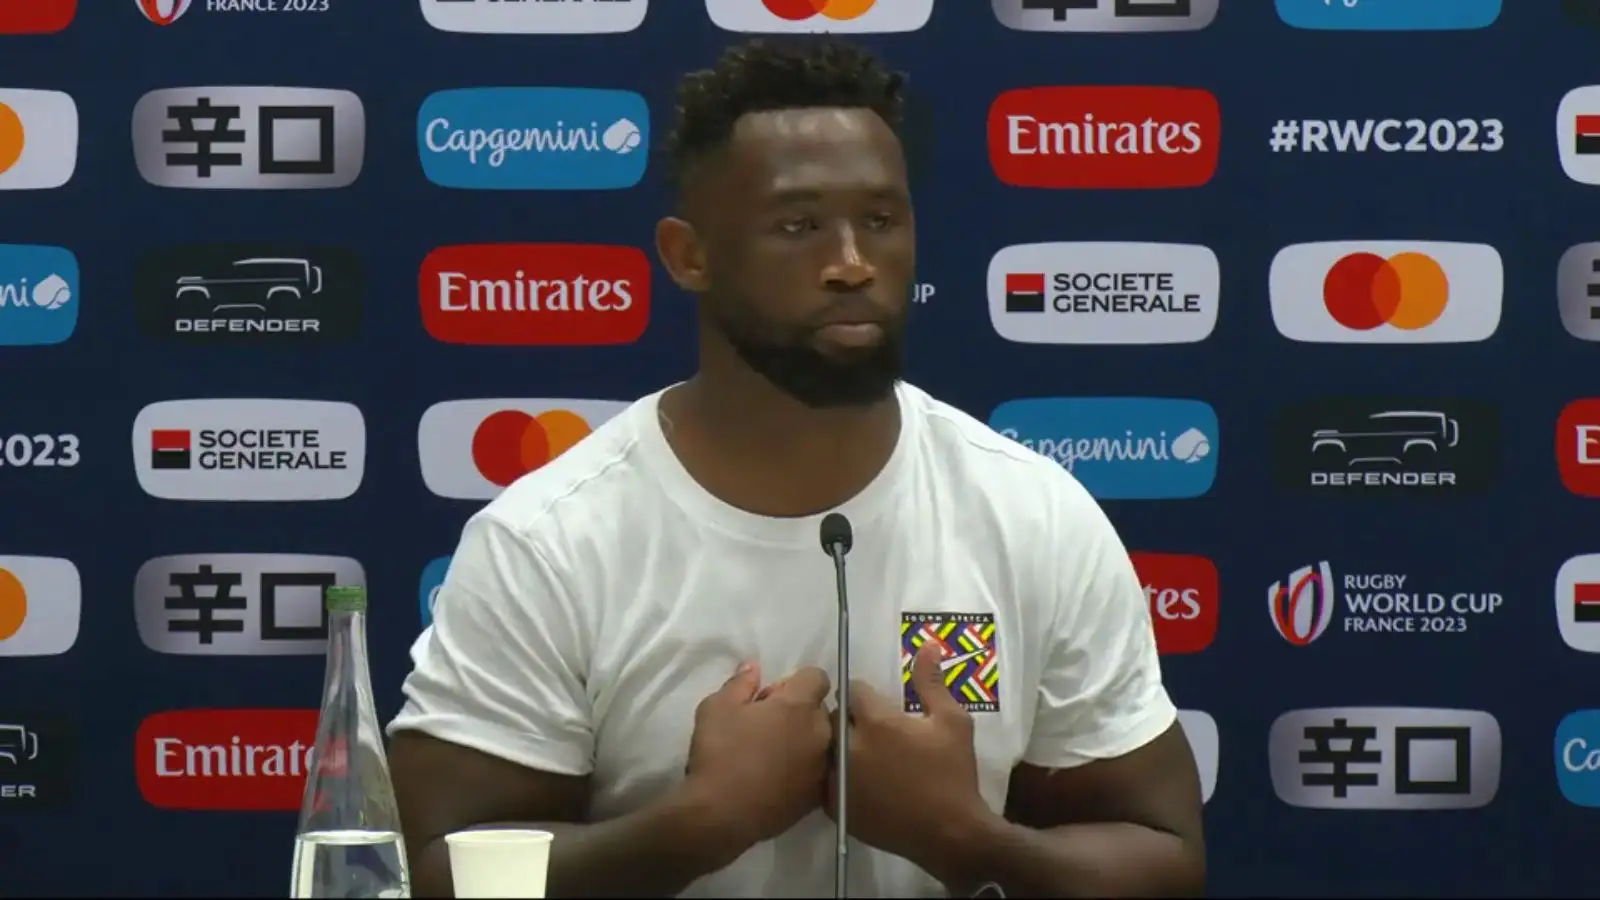 Springboks captain Siya Kolisi during the post match press conference after South Africa v Scotland - Rugby World Cup (Credit: Rugby World Cup)